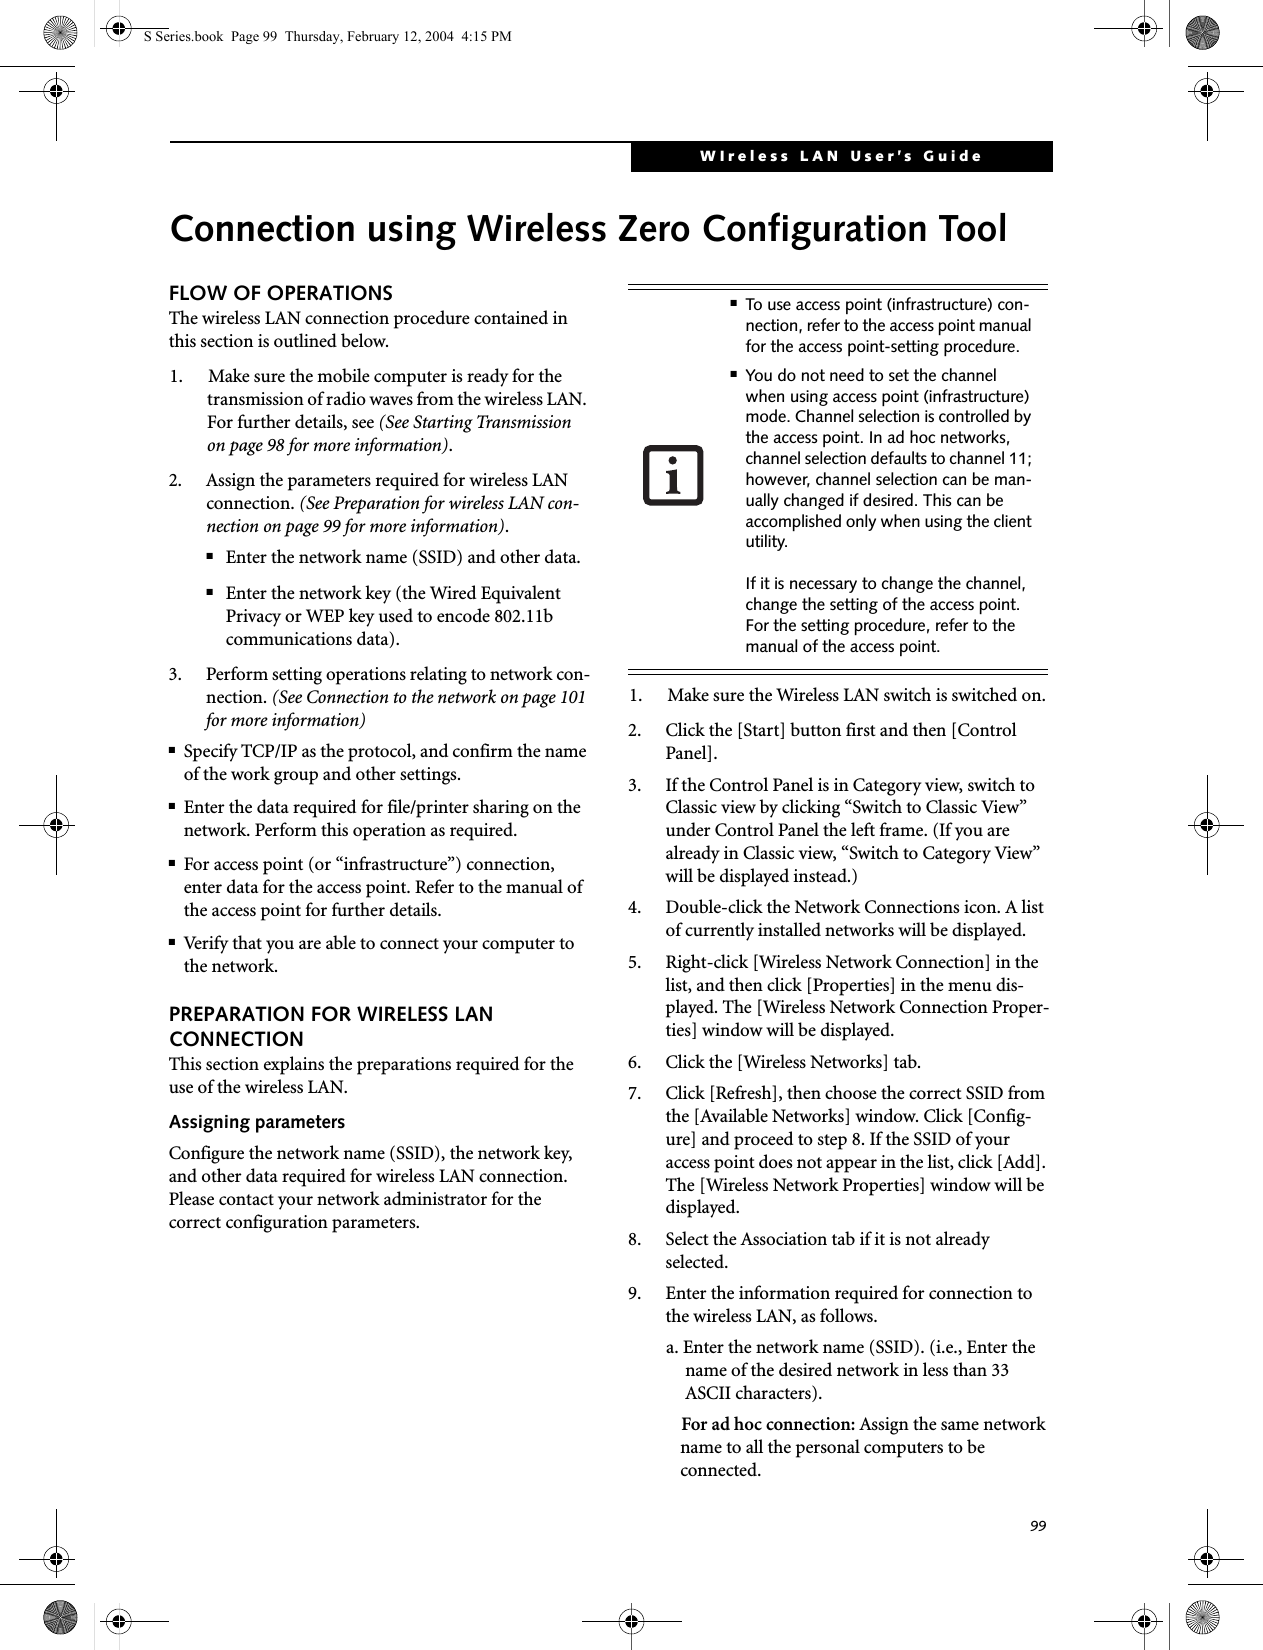 99WIreless LAN User’s Guide Connection using Wireless Zero Configuration ToolFLOW OF OPERATIONSThe wireless LAN connection procedure contained in this section is outlined below.1. Make sure the mobile computer is ready for the transmission of radio waves from the wireless LAN. For further details, see (See Starting Transmission on page 98 for more information).2. Assign the parameters required for wireless LAN connection. (See Preparation for wireless LAN con-nection on page 99 for more information).■Enter the network name (SSID) and other data.■Enter the network key (the Wired Equivalent Privacy or WEP key used to encode 802.11b communications data).3. Perform setting operations relating to network con-nection. (See Connection to the network on page 101 for more information)■Specify TCP/IP as the protocol, and confirm the name of the work group and other settings.■Enter the data required for file/printer sharing on the network. Perform this operation as required.■For access point (or “infrastructure”) connection, enter data for the access point. Refer to the manual of the access point for further details.■Verify that you are able to connect your computer to the network.PREPARATION FOR WIRELESS LAN CONNECTIONThis section explains the preparations required for the use of the wireless LAN.Assigning parametersConfigure the network name (SSID), the network key, and other data required for wireless LAN connection. Please contact your network administrator for the correct configuration parameters.1. Make sure the Wireless LAN switch is switched on.2. Click the [Start] button first and then [Control Panel].3. If the Control Panel is in Category view, switch to Classic view by clicking “Switch to Classic View” under Control Panel the left frame. (If you are already in Classic view, “Switch to Category View” will be displayed instead.) 4. Double-click the Network Connections icon. A list of currently installed networks will be displayed.5. Right-click [Wireless Network Connection] in the list, and then click [Properties] in the menu dis-played. The [Wireless Network Connection Proper-ties] window will be displayed.6. Click the [Wireless Networks] tab.7. Click [Refresh], then choose the correct SSID from the [Available Networks] window. Click [Config-ure] and proceed to step 8. If the SSID of your access point does not appear in the list, click [Add]. The [Wireless Network Properties] window will be displayed.8. Select the Association tab if it is not already selected.9. Enter the information required for connection to the wireless LAN, as follows.a. Enter the network name (SSID). (i.e., Enter the name of the desired network in less than 33 ASCII characters).For ad hoc connection: Assign the same network name to all the personal computers to be connected.■To use access point (infrastructure) con-nection, refer to the access point manual for the access point-setting procedure.■You do not need to set the channel when using access point (infrastructure) mode. Channel selection is controlled by the access point. In ad hoc networks, channel selection defaults to channel 11; however, channel selection can be man-ually changed if desired. This can be accomplished only when using the client utility.If it is necessary to change the channel, change the setting of the access point. For the setting procedure, refer to the manual of the access point.S Series.book  Page 99  Thursday, February 12, 2004  4:15 PM